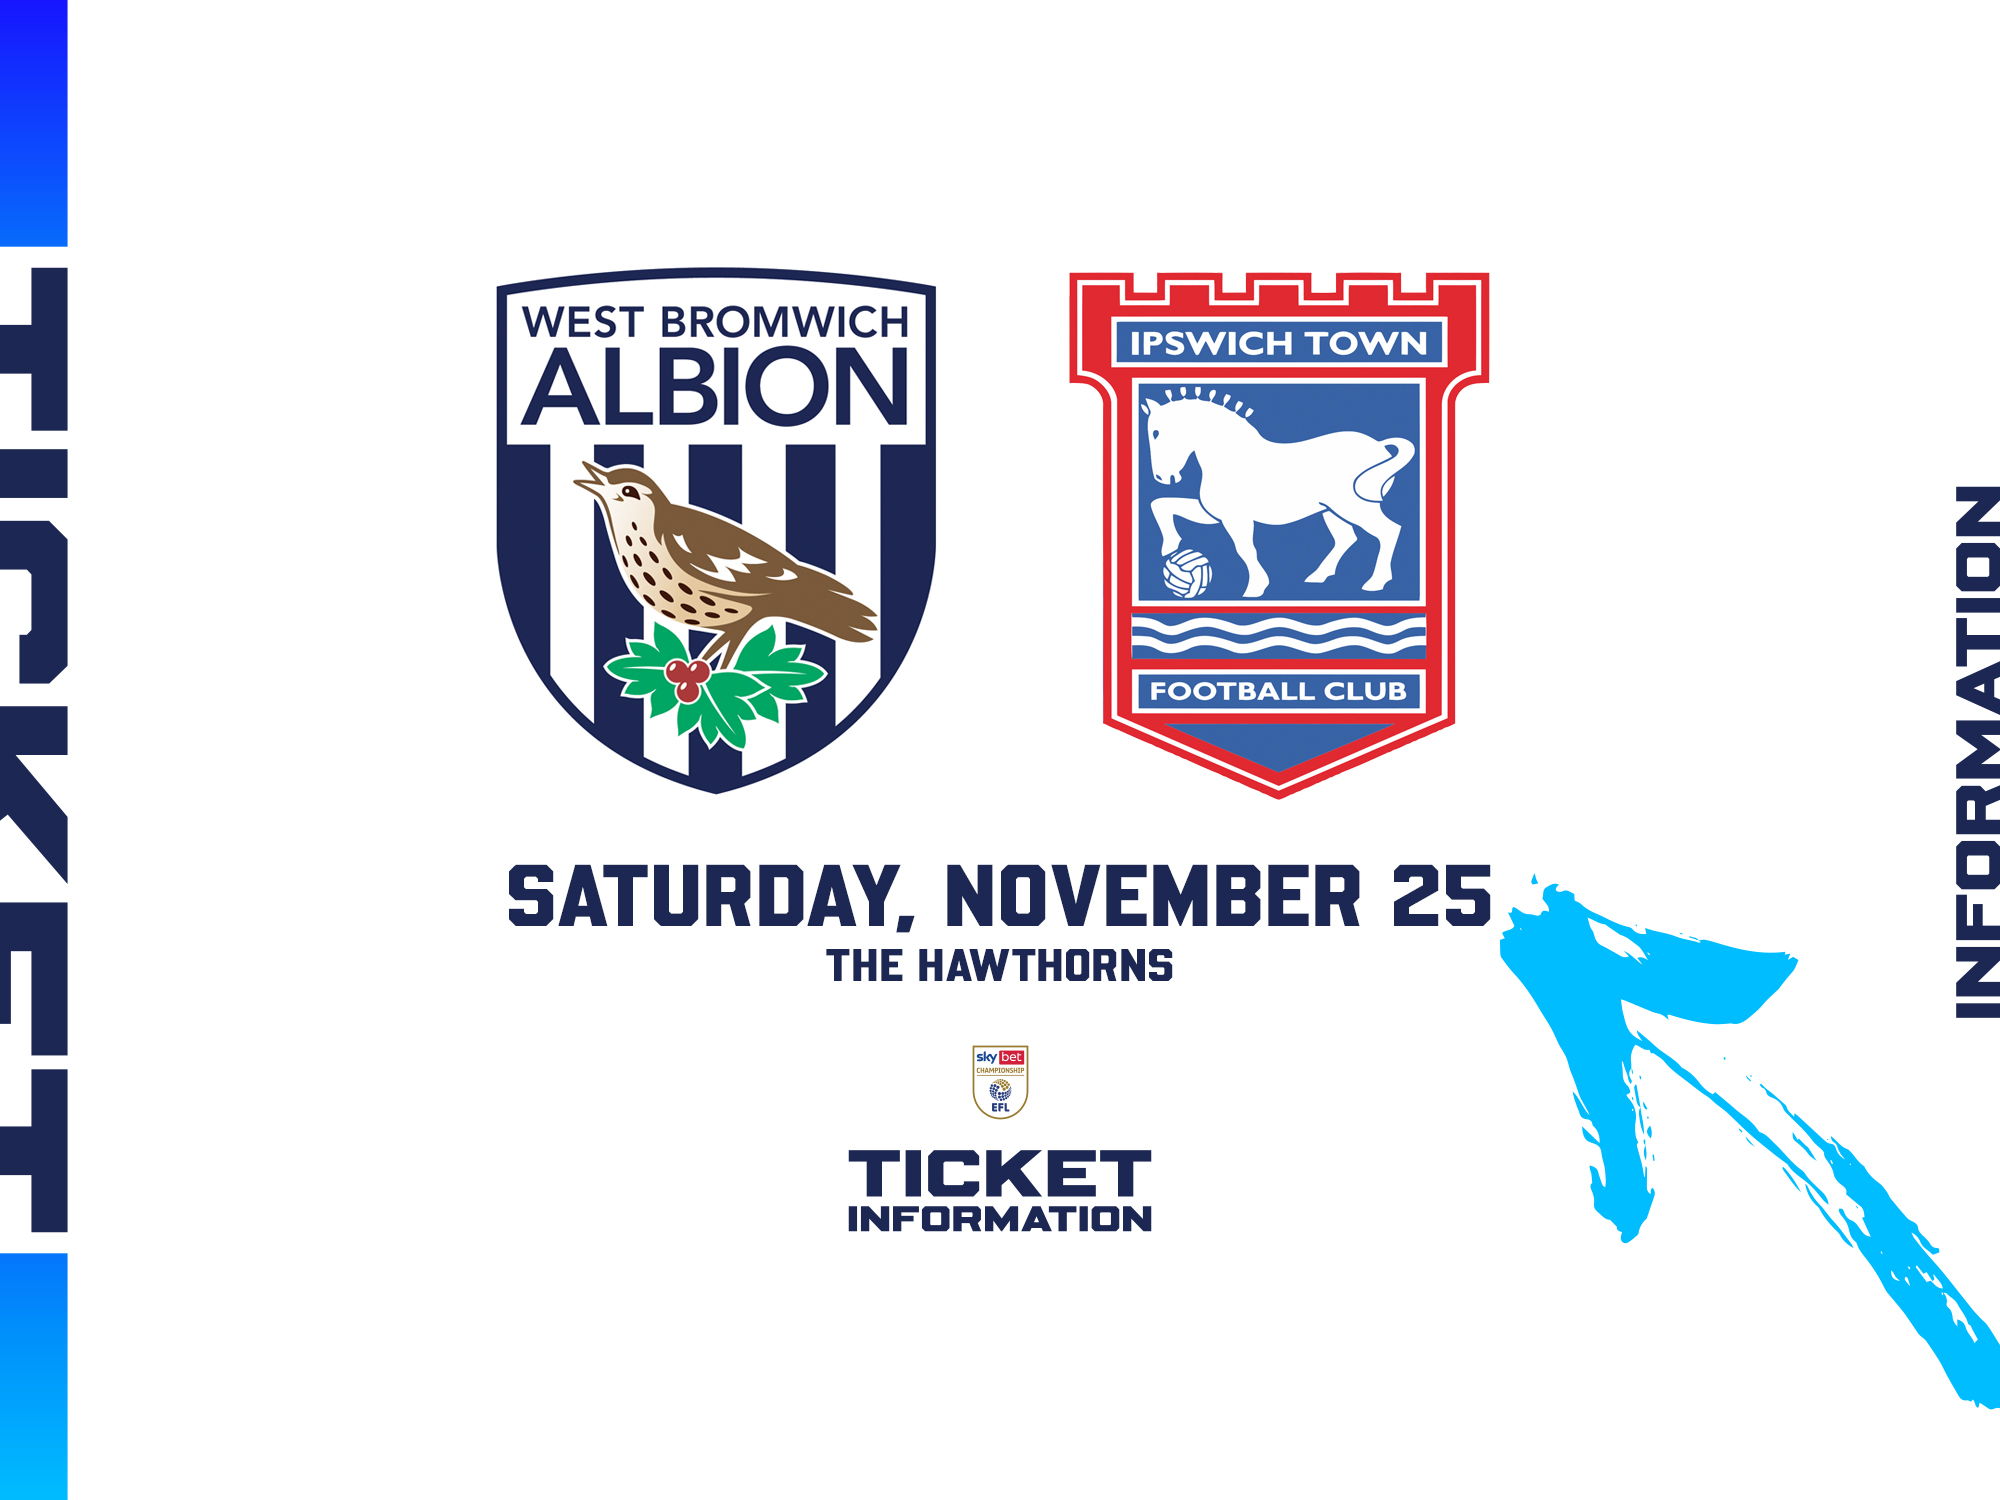 WBA and Ipswich Town badges in the ticket graphic 